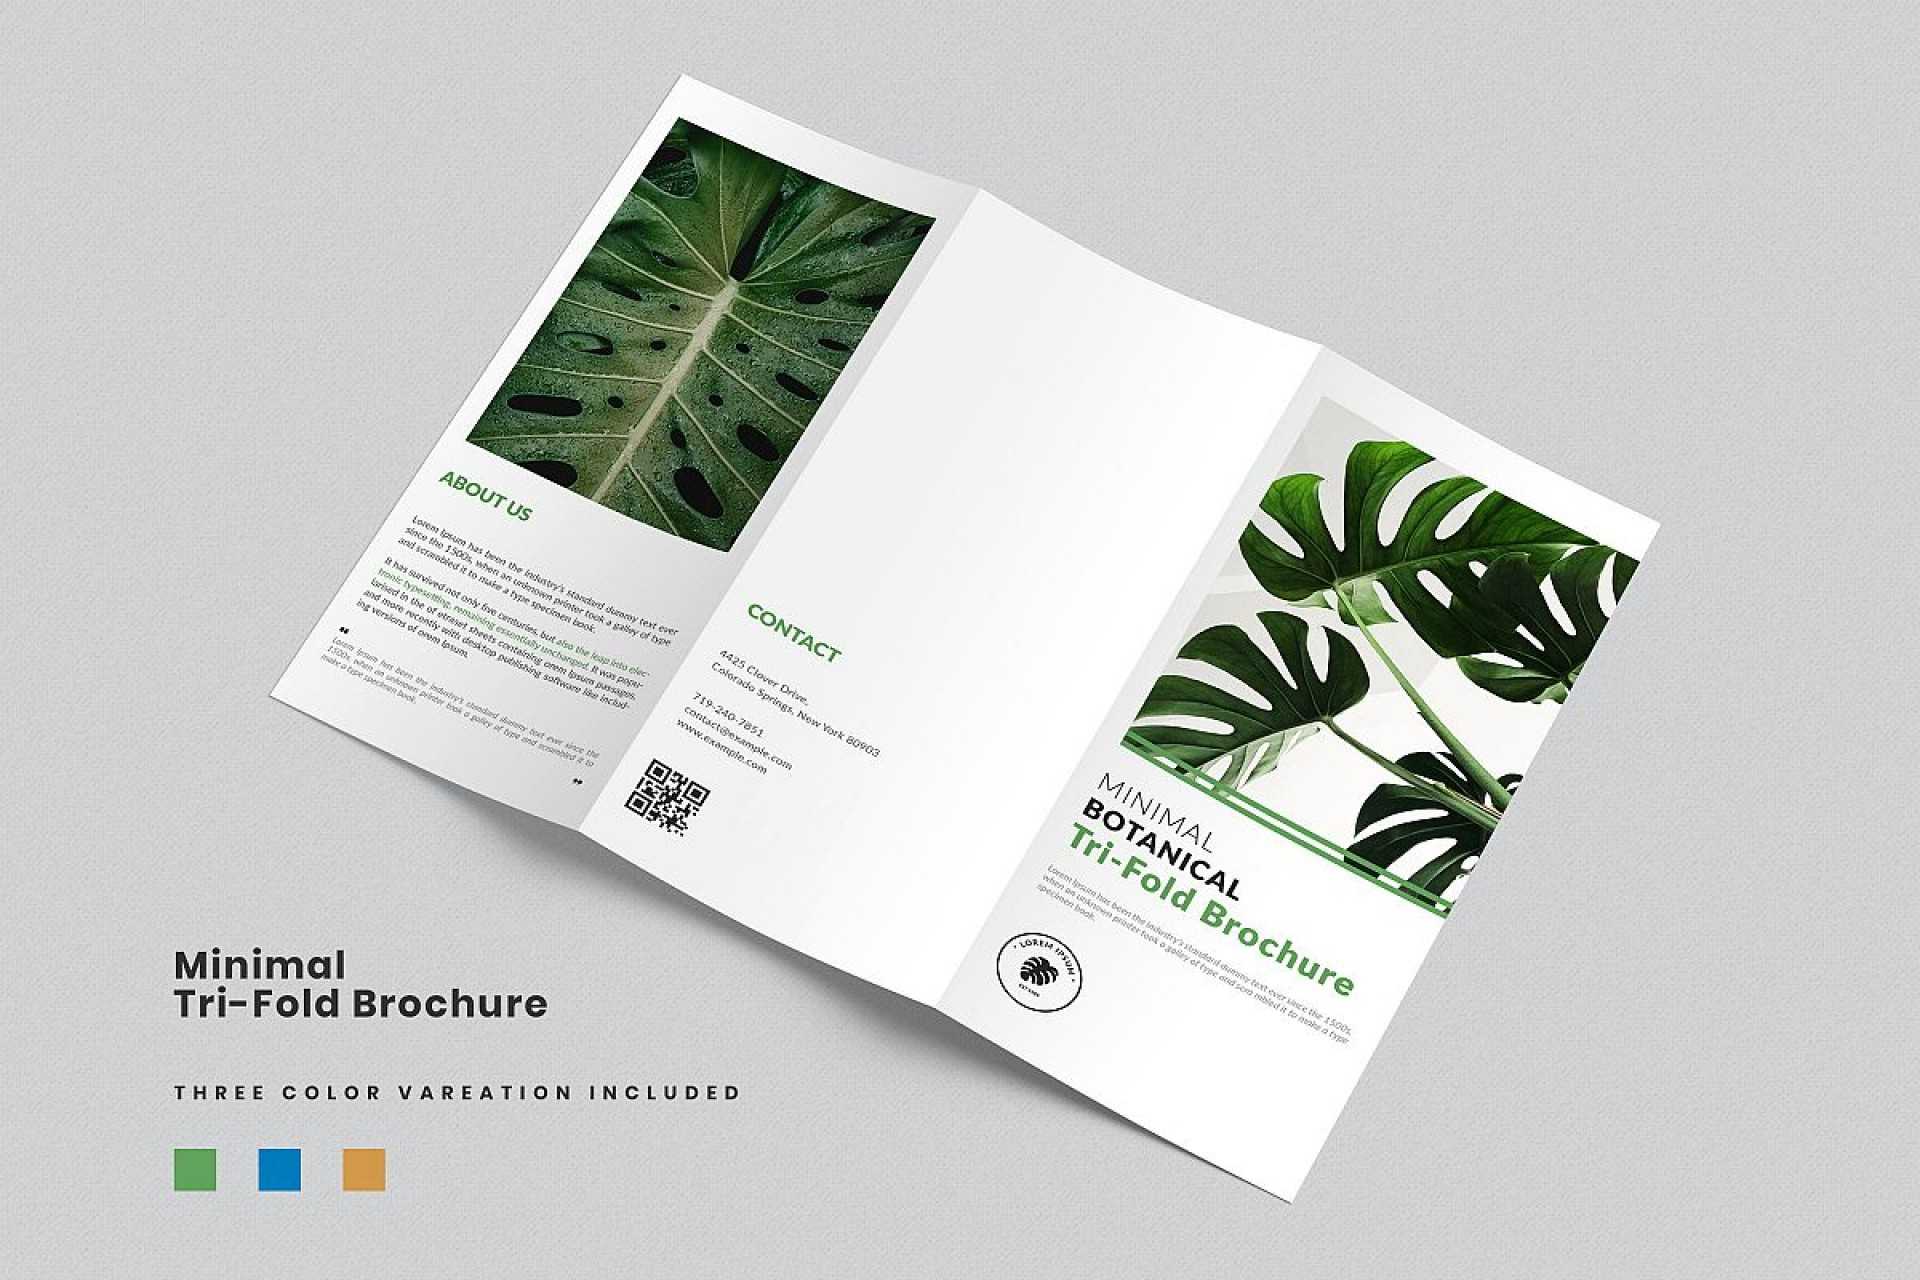 028 Cf913Be5Dabba16Cf80E3837D389F42B Resize Free Adobe Within Adobe Indesign Brochure Templates